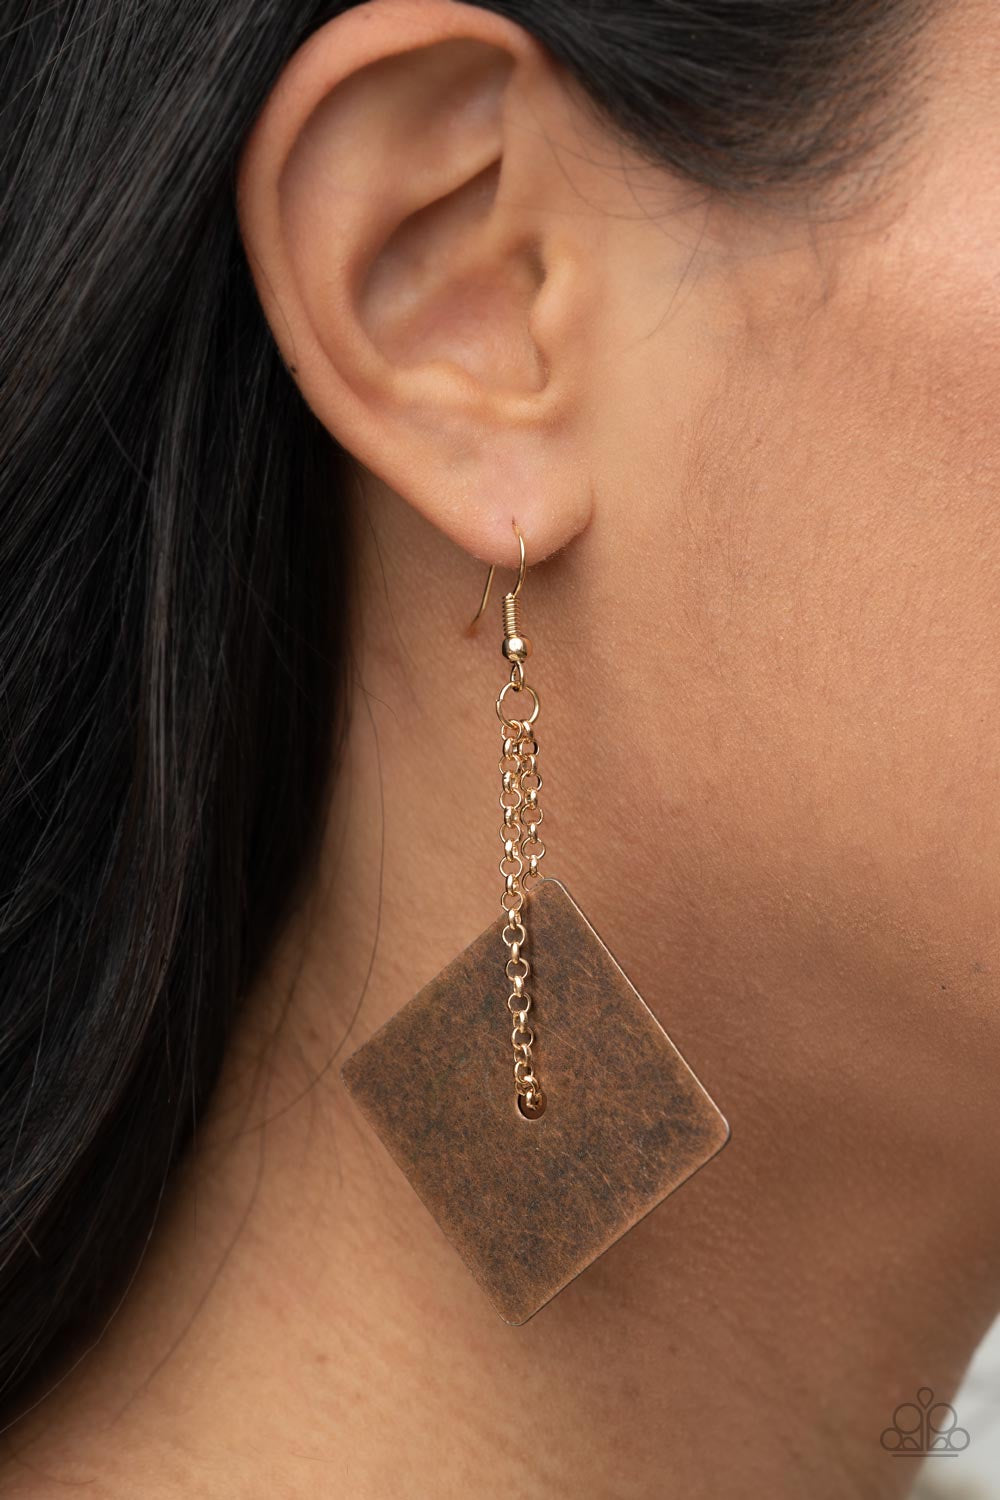 Paparazzi Block Party Posh - Copper Earrings -Paparazzi Jewelry Images